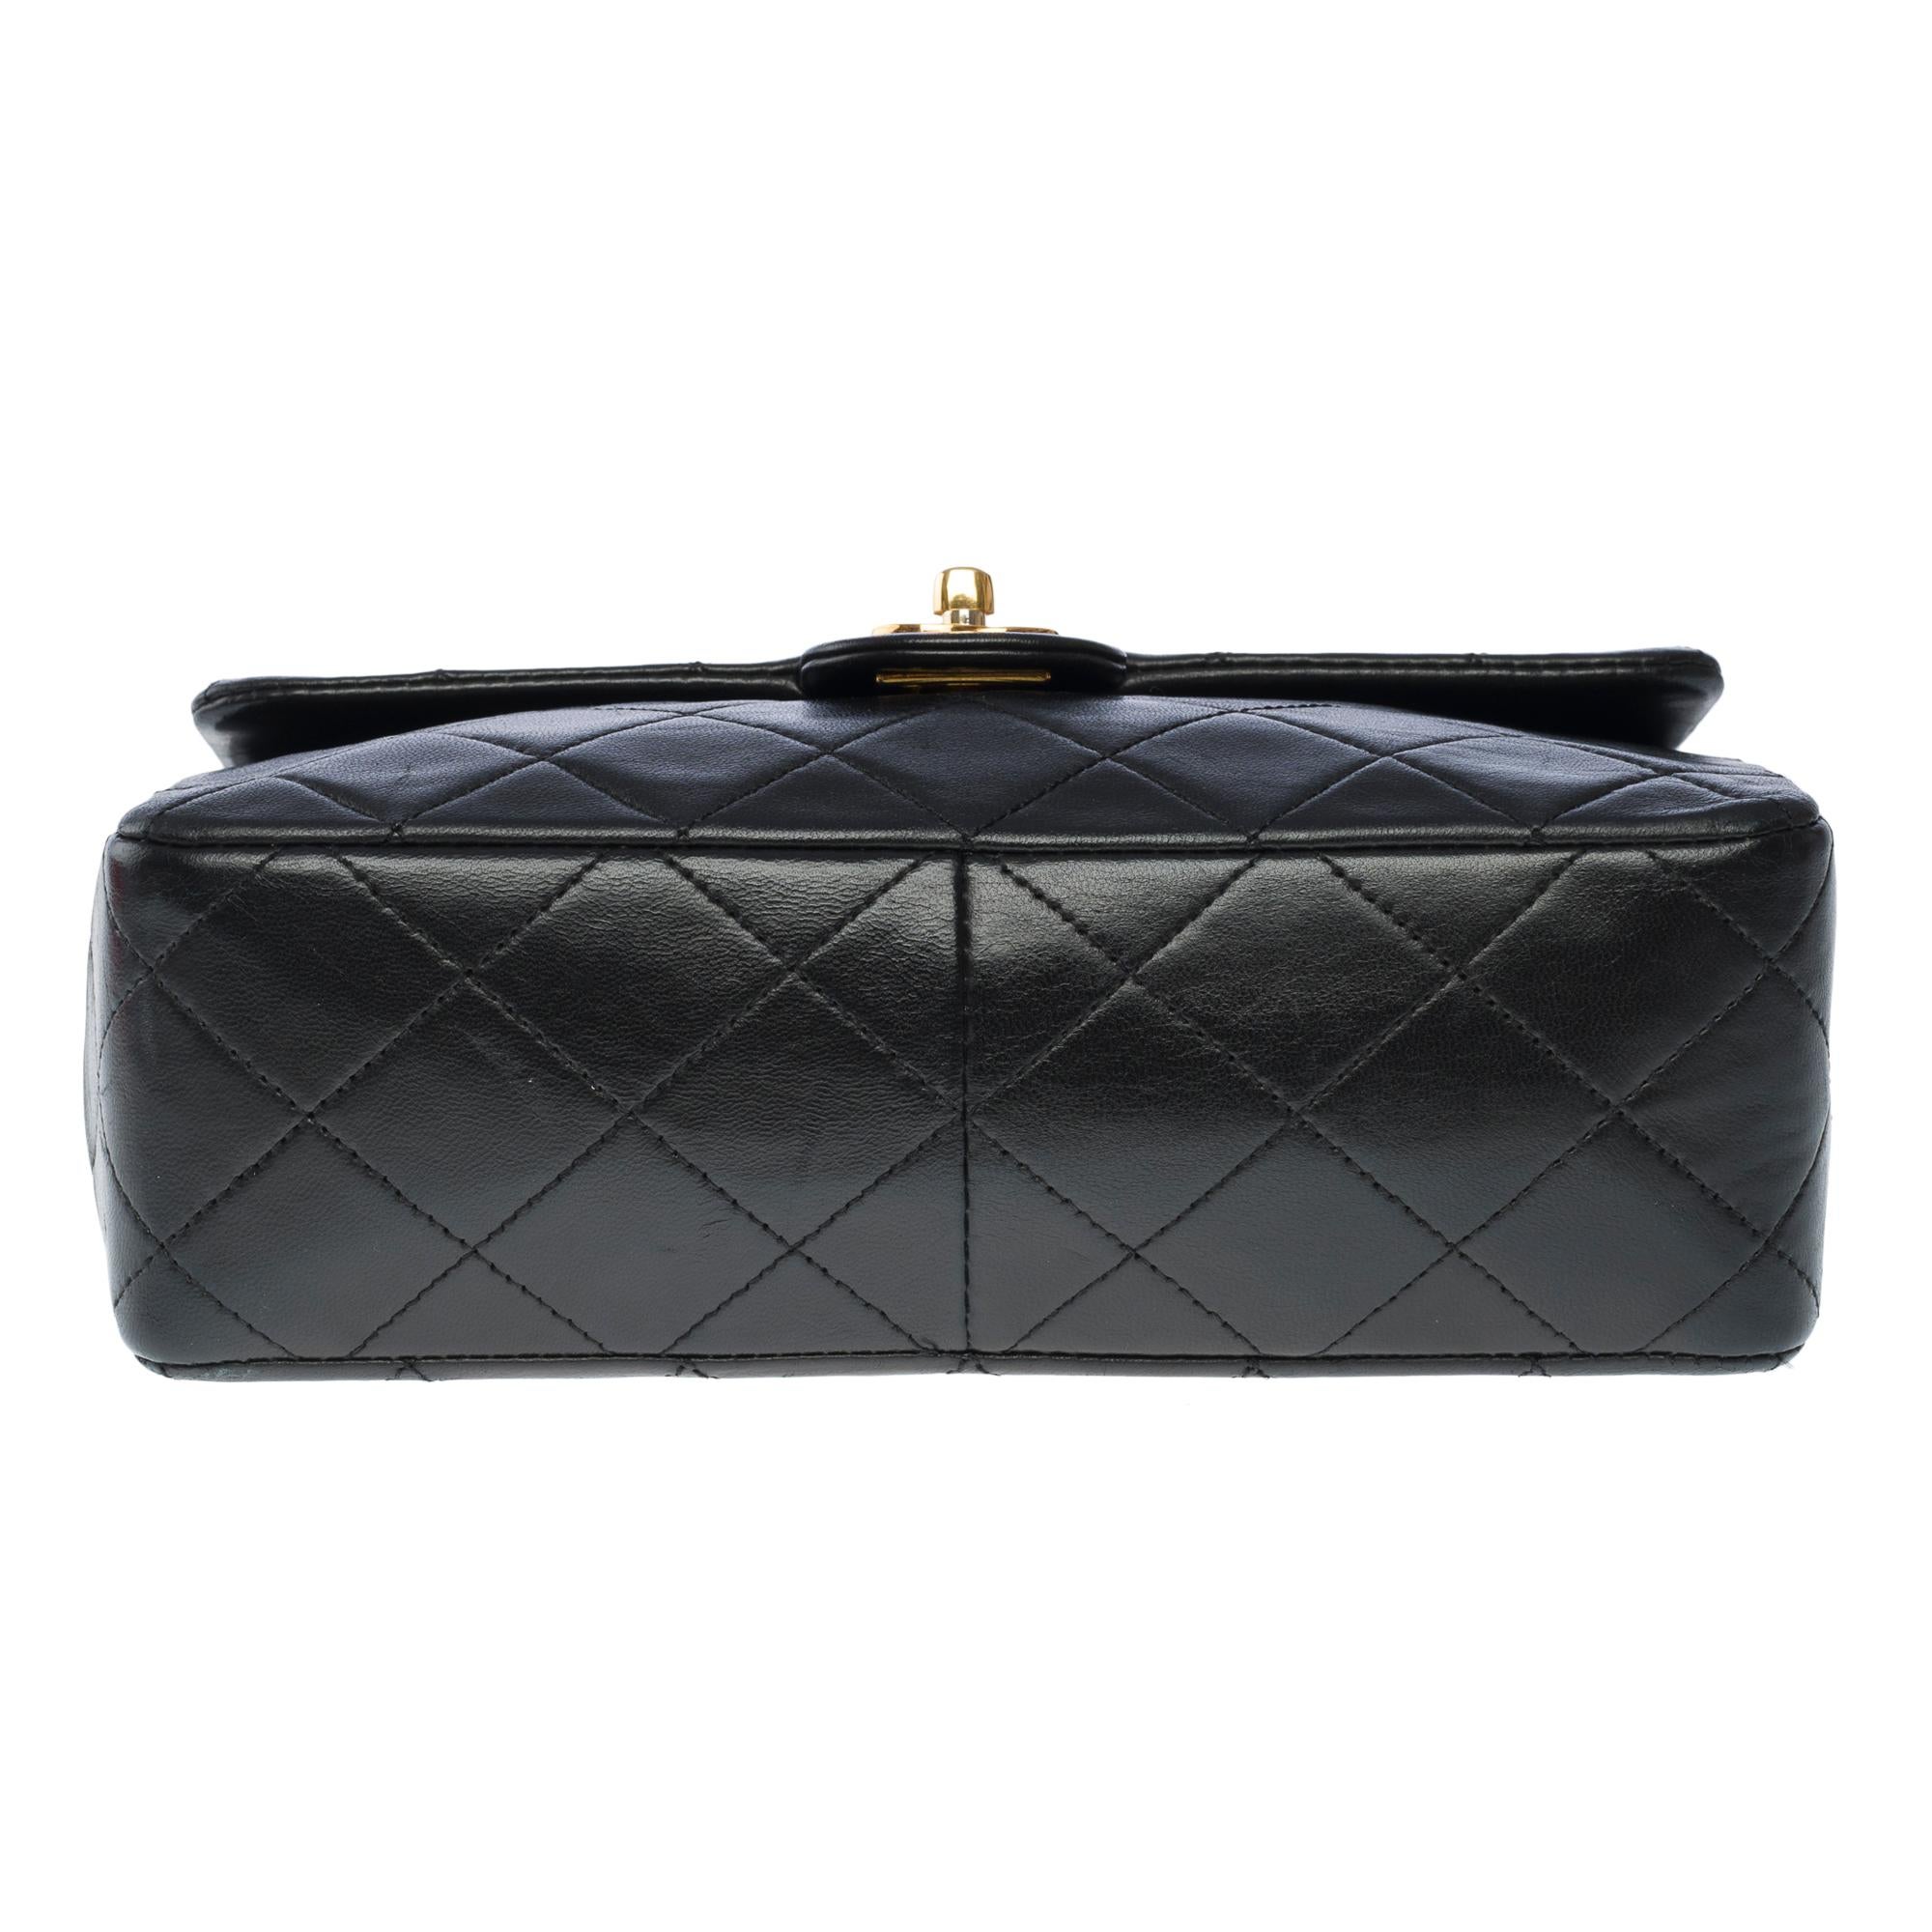 Gorgeous Chanel Timeless Mini shoulder flap bag in black quilted lambskin, GHW 7